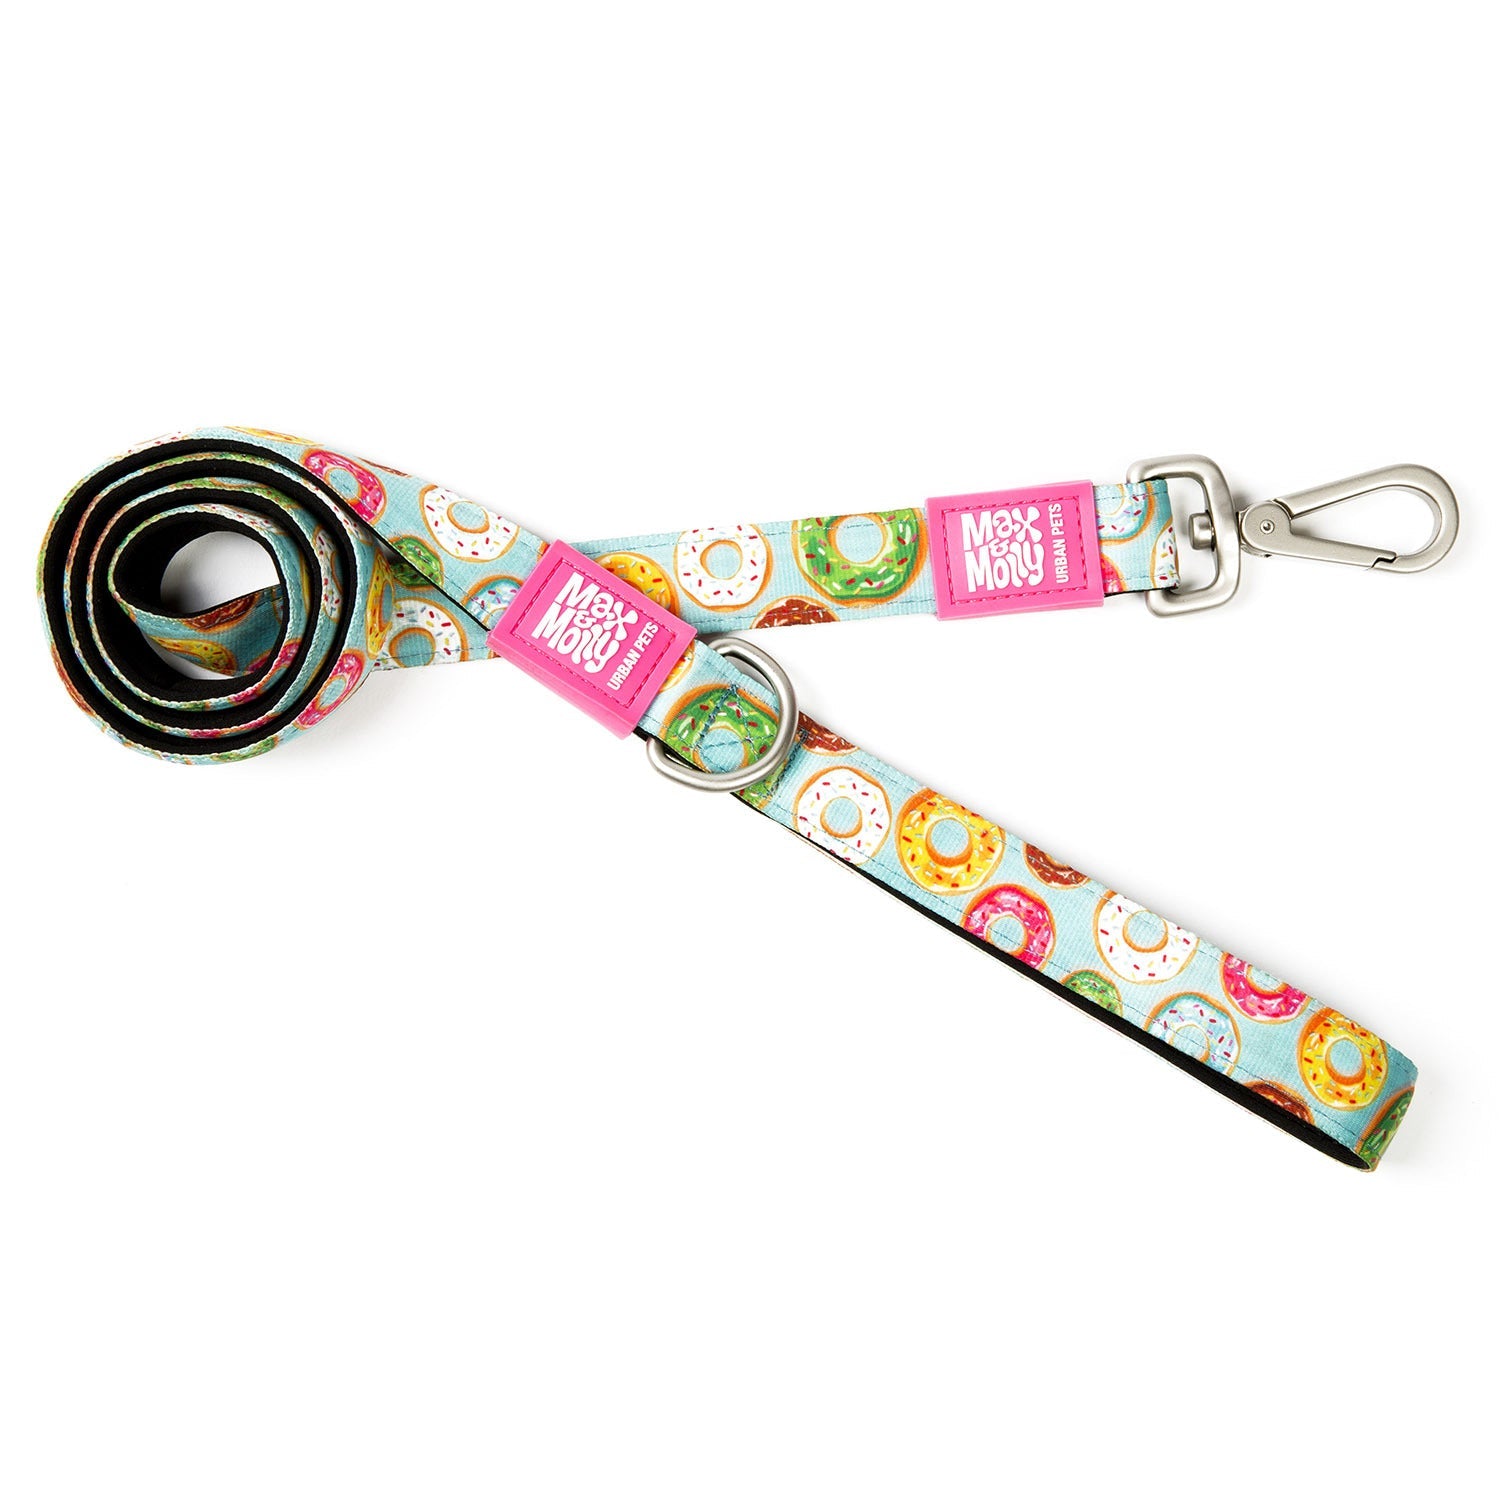 Max & Molly Dog Leash - Donuts - Pets and More